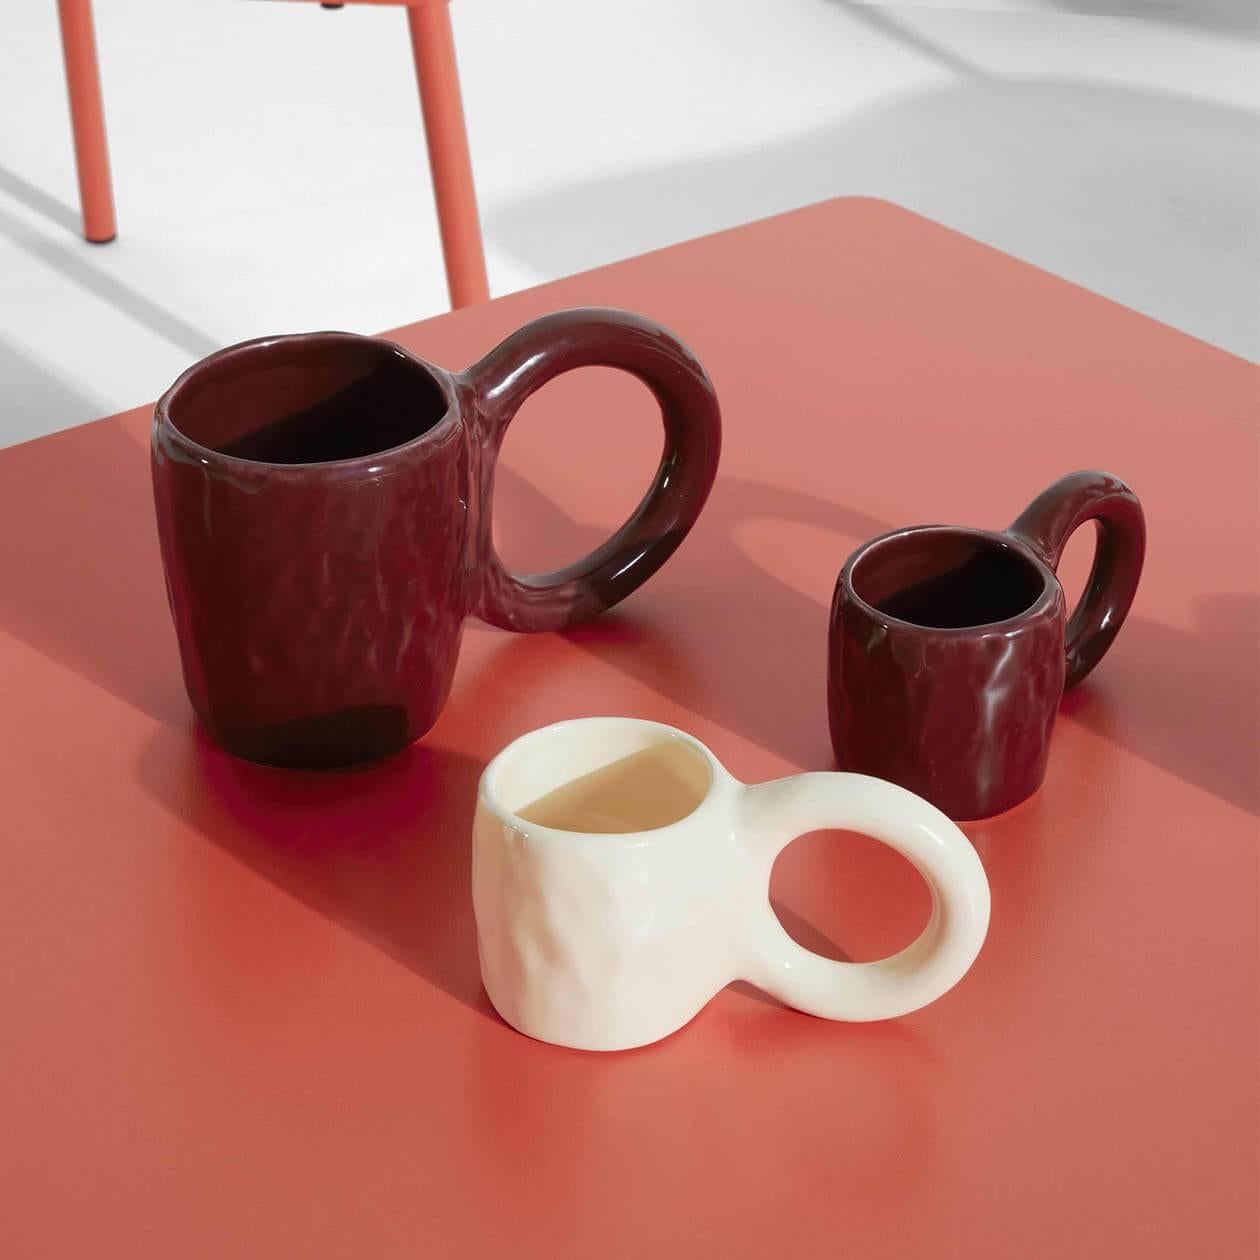 Glazed PETITE FRITURE Donut, Set of 2 Espresso, Cherry, Designed by Pia Chevalier For Sale